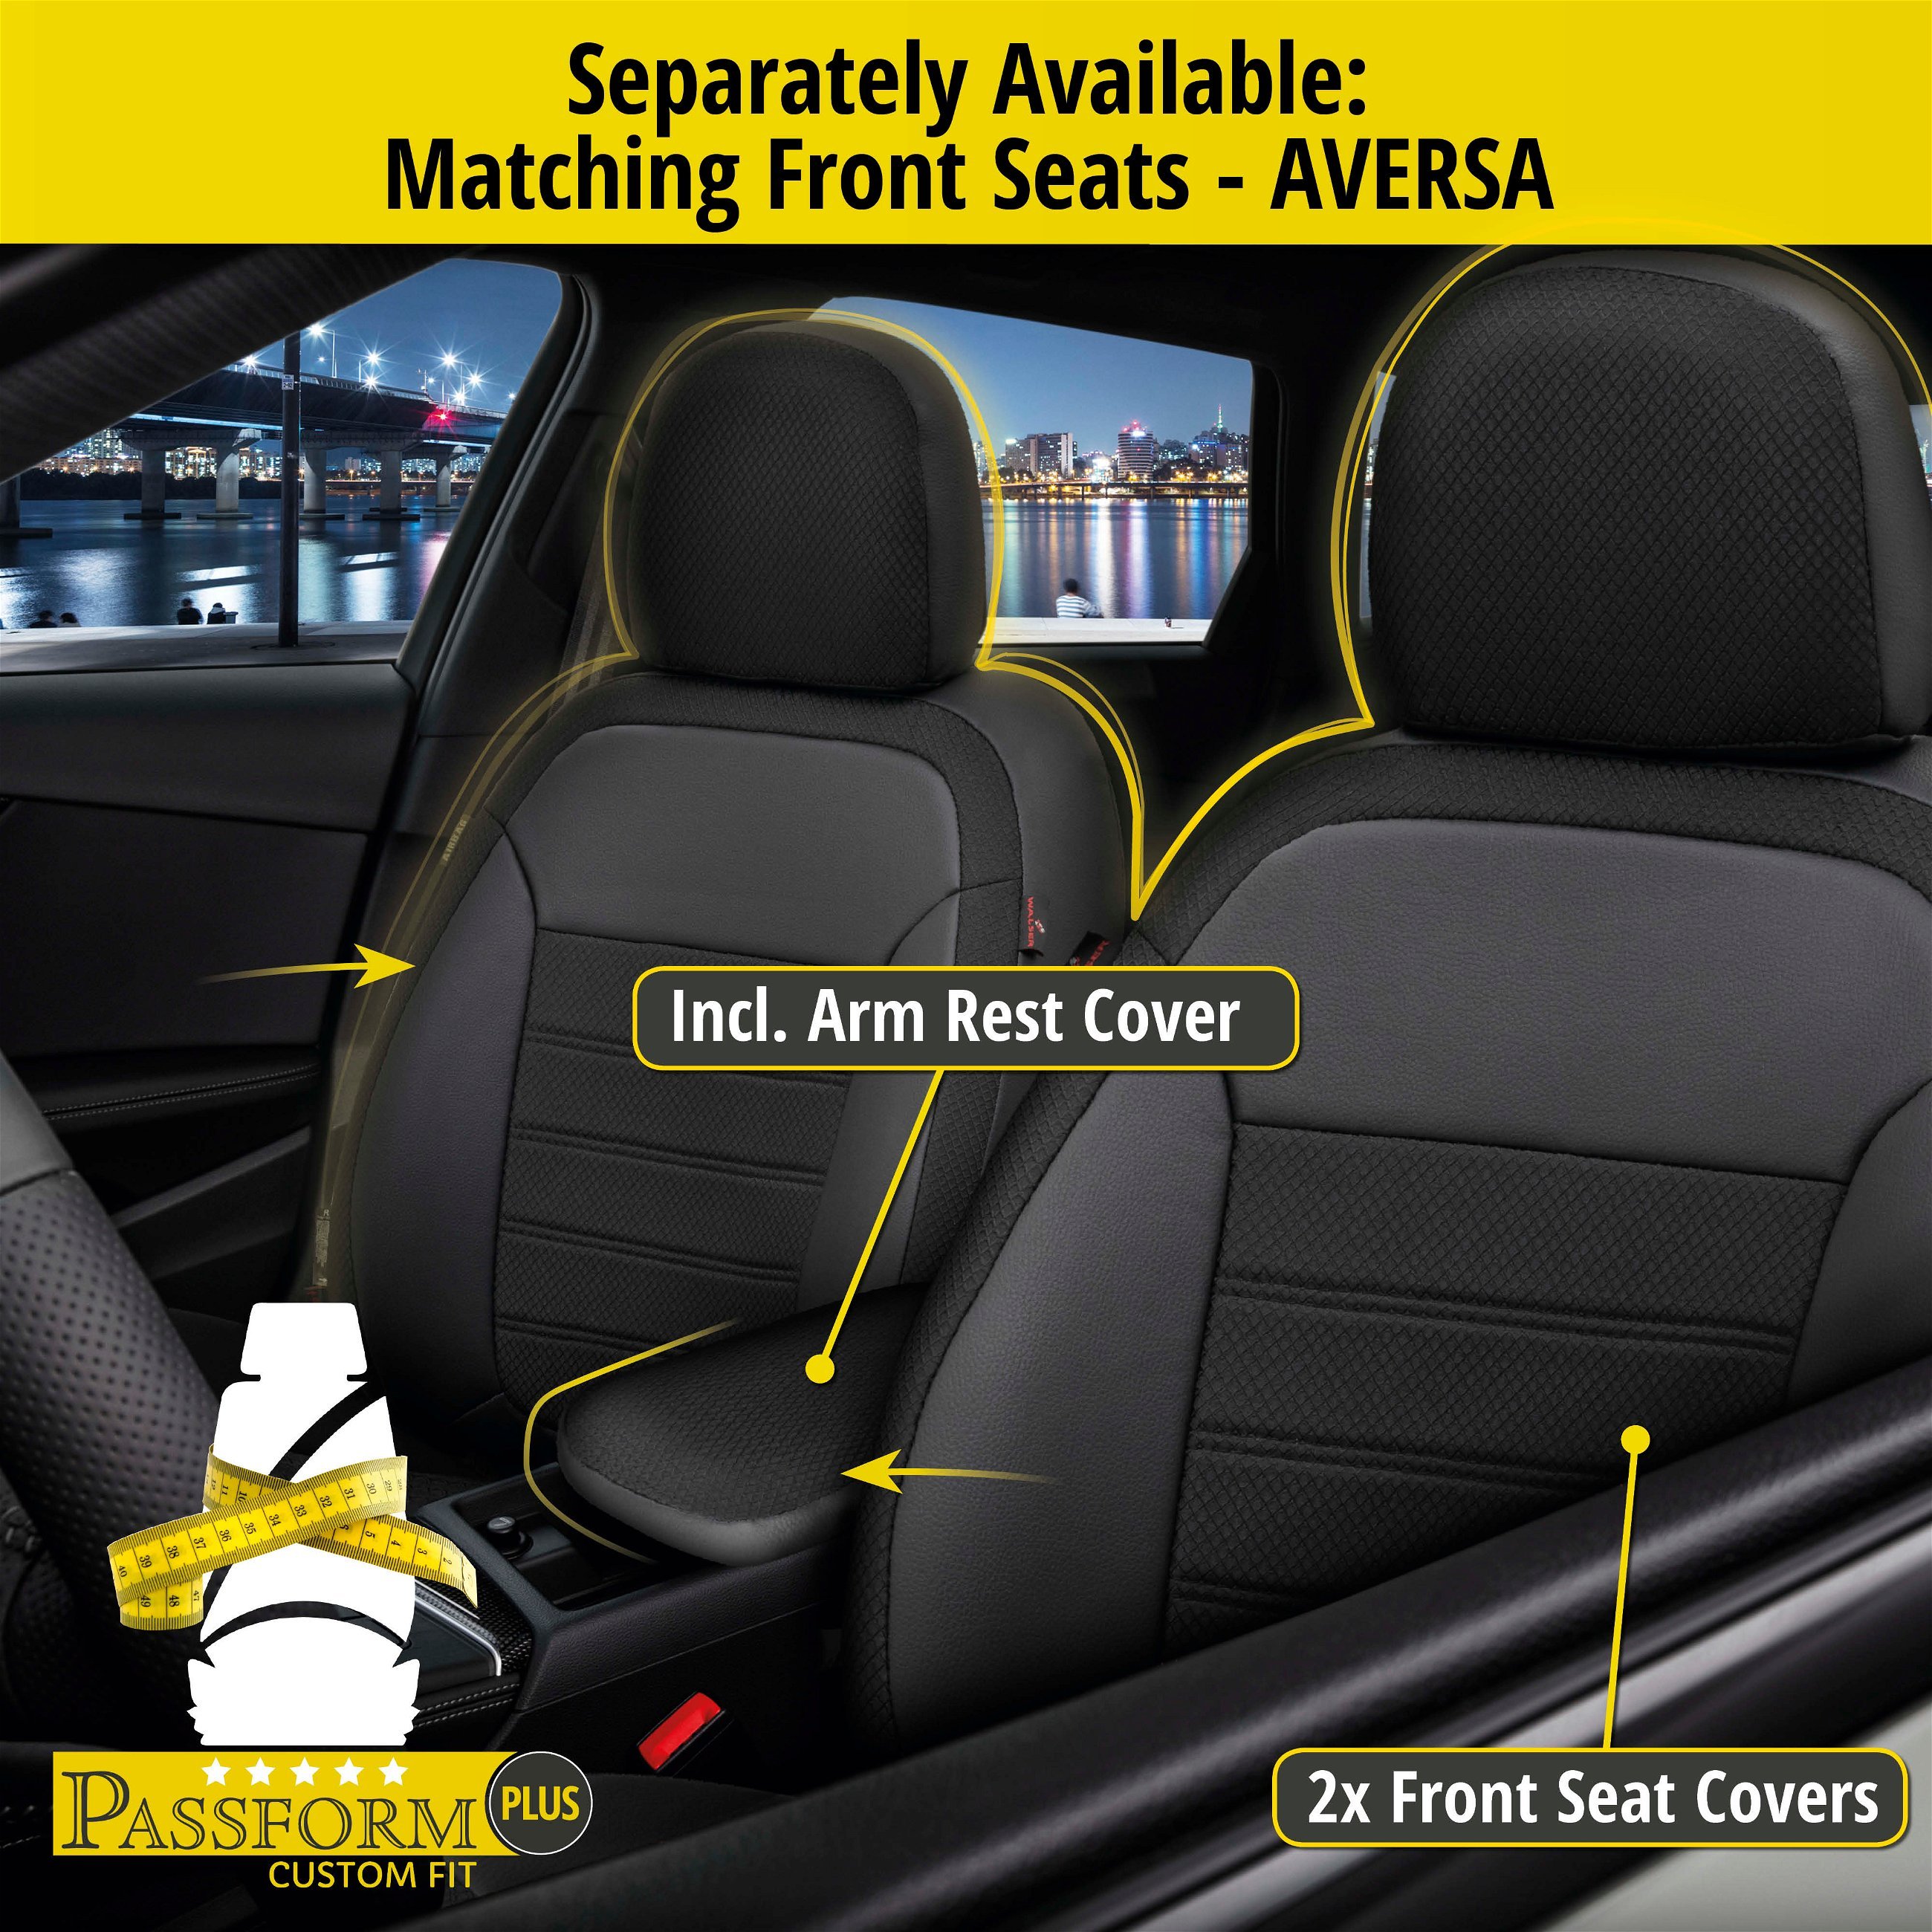 Seat Cover Aversa for Mercedes-Benz E-Class (W124) 02/1993-06/1996, 1 rear seat cover for normal seats